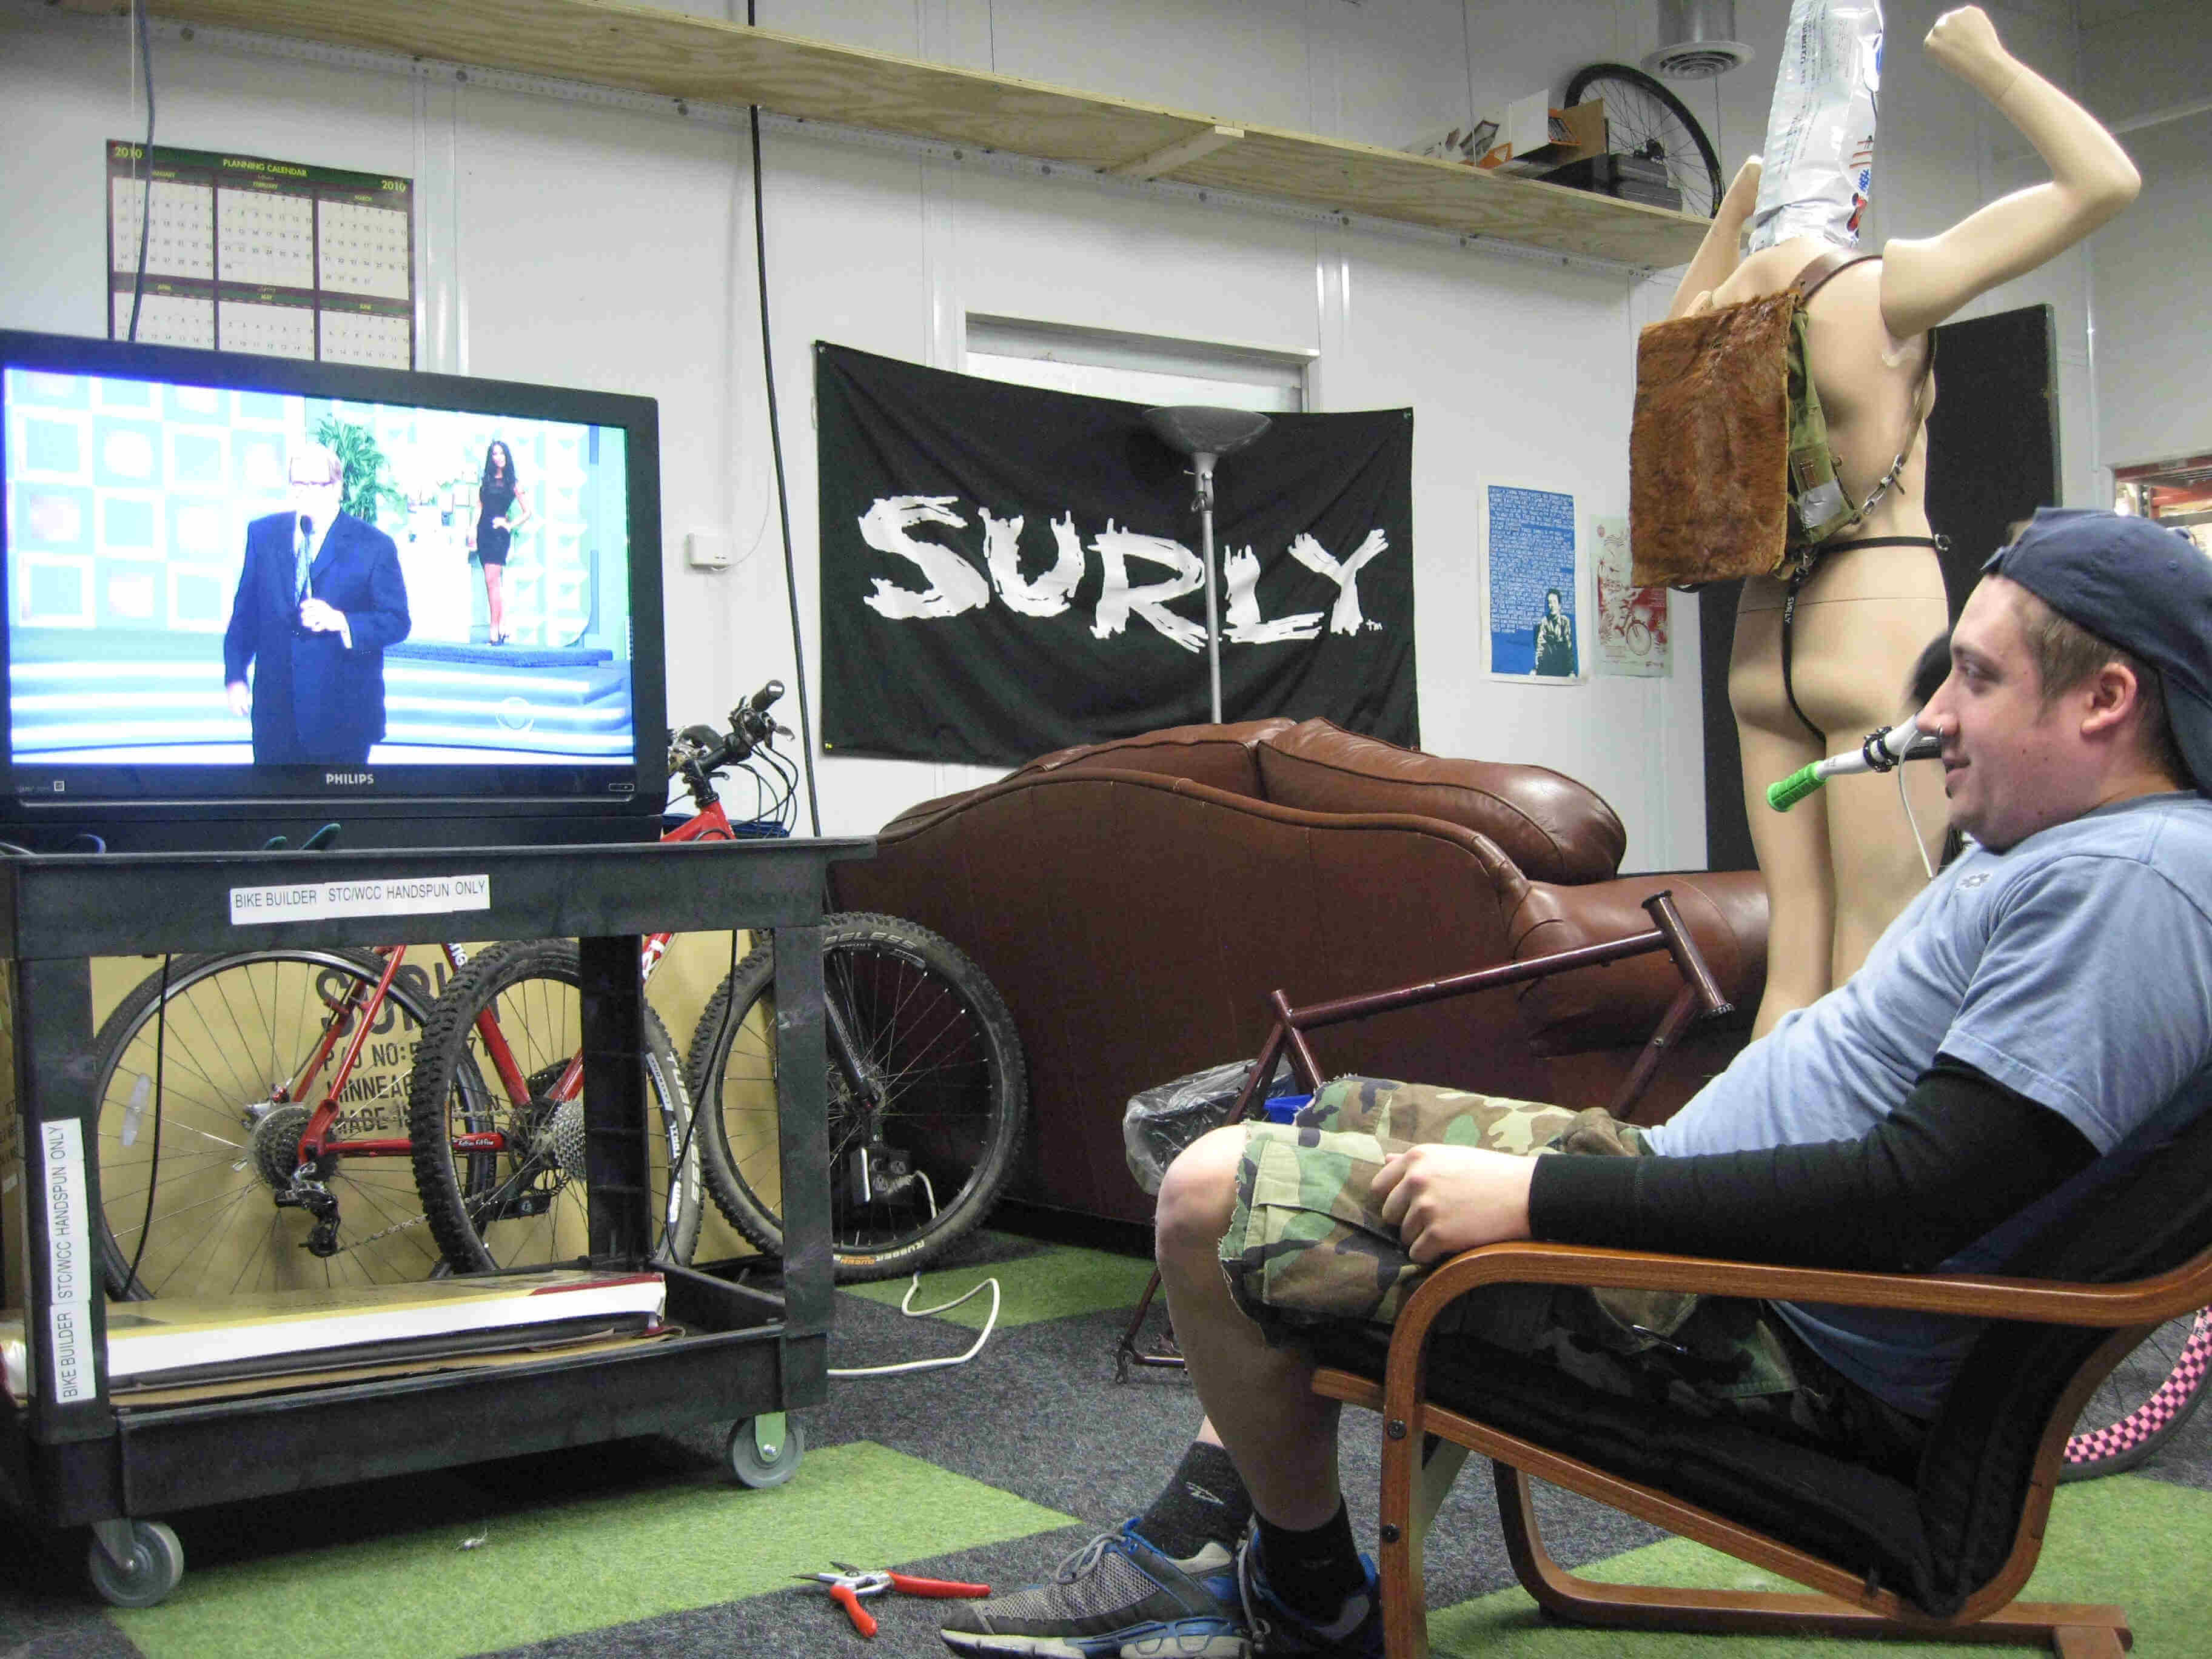 Left side view of a person sitting in a chair, watching a TV on a cart, in a room with a Surly banner on the wall